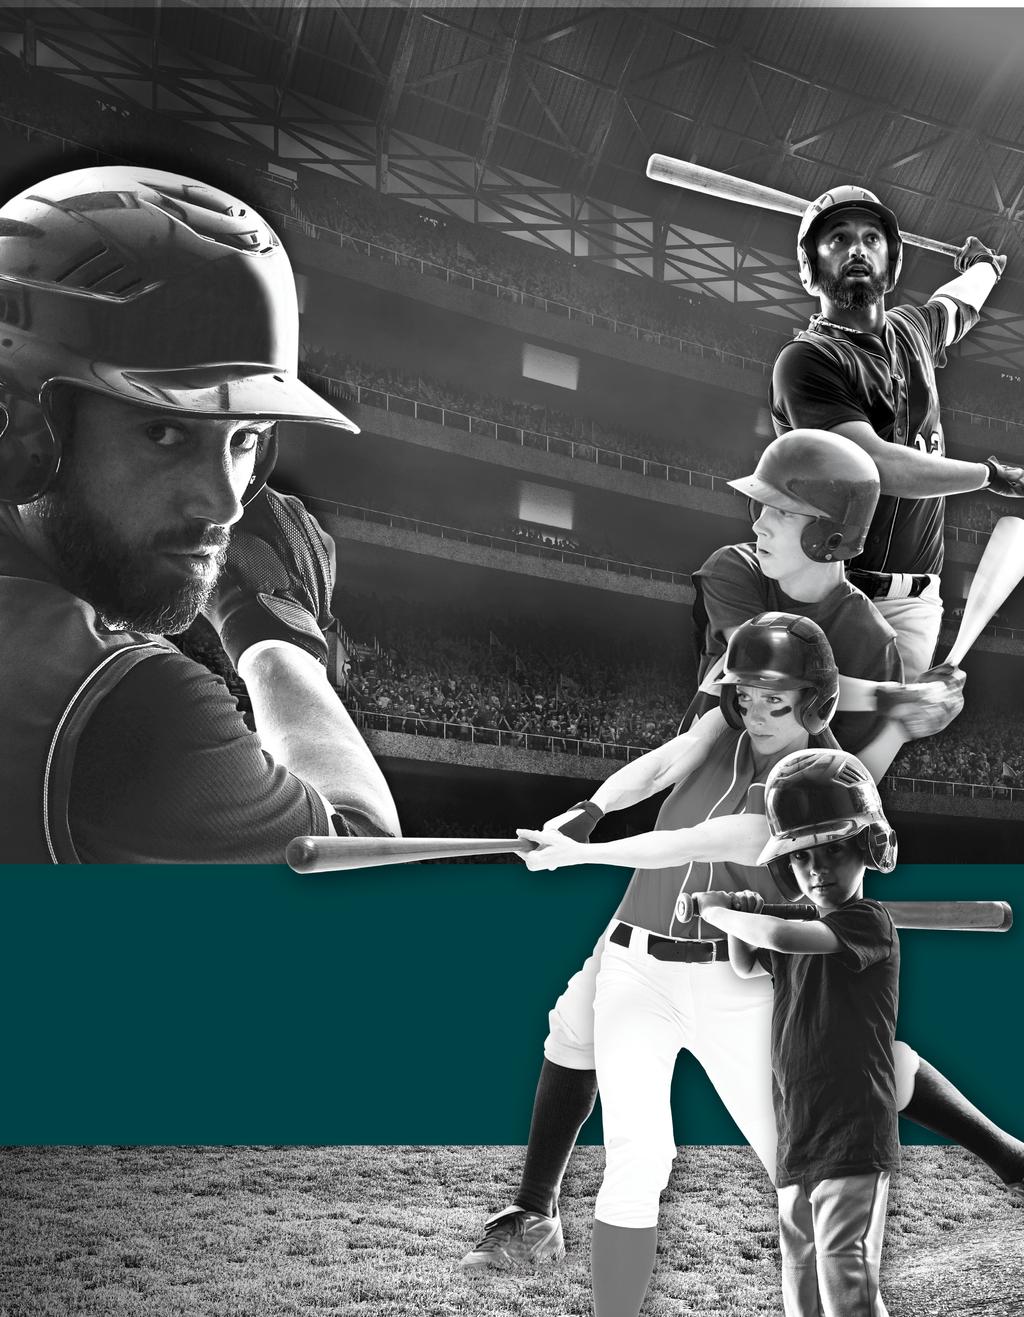 BASEBALL 2017 YOUTH TO THE BIG LEAGUES: MANAGING THE